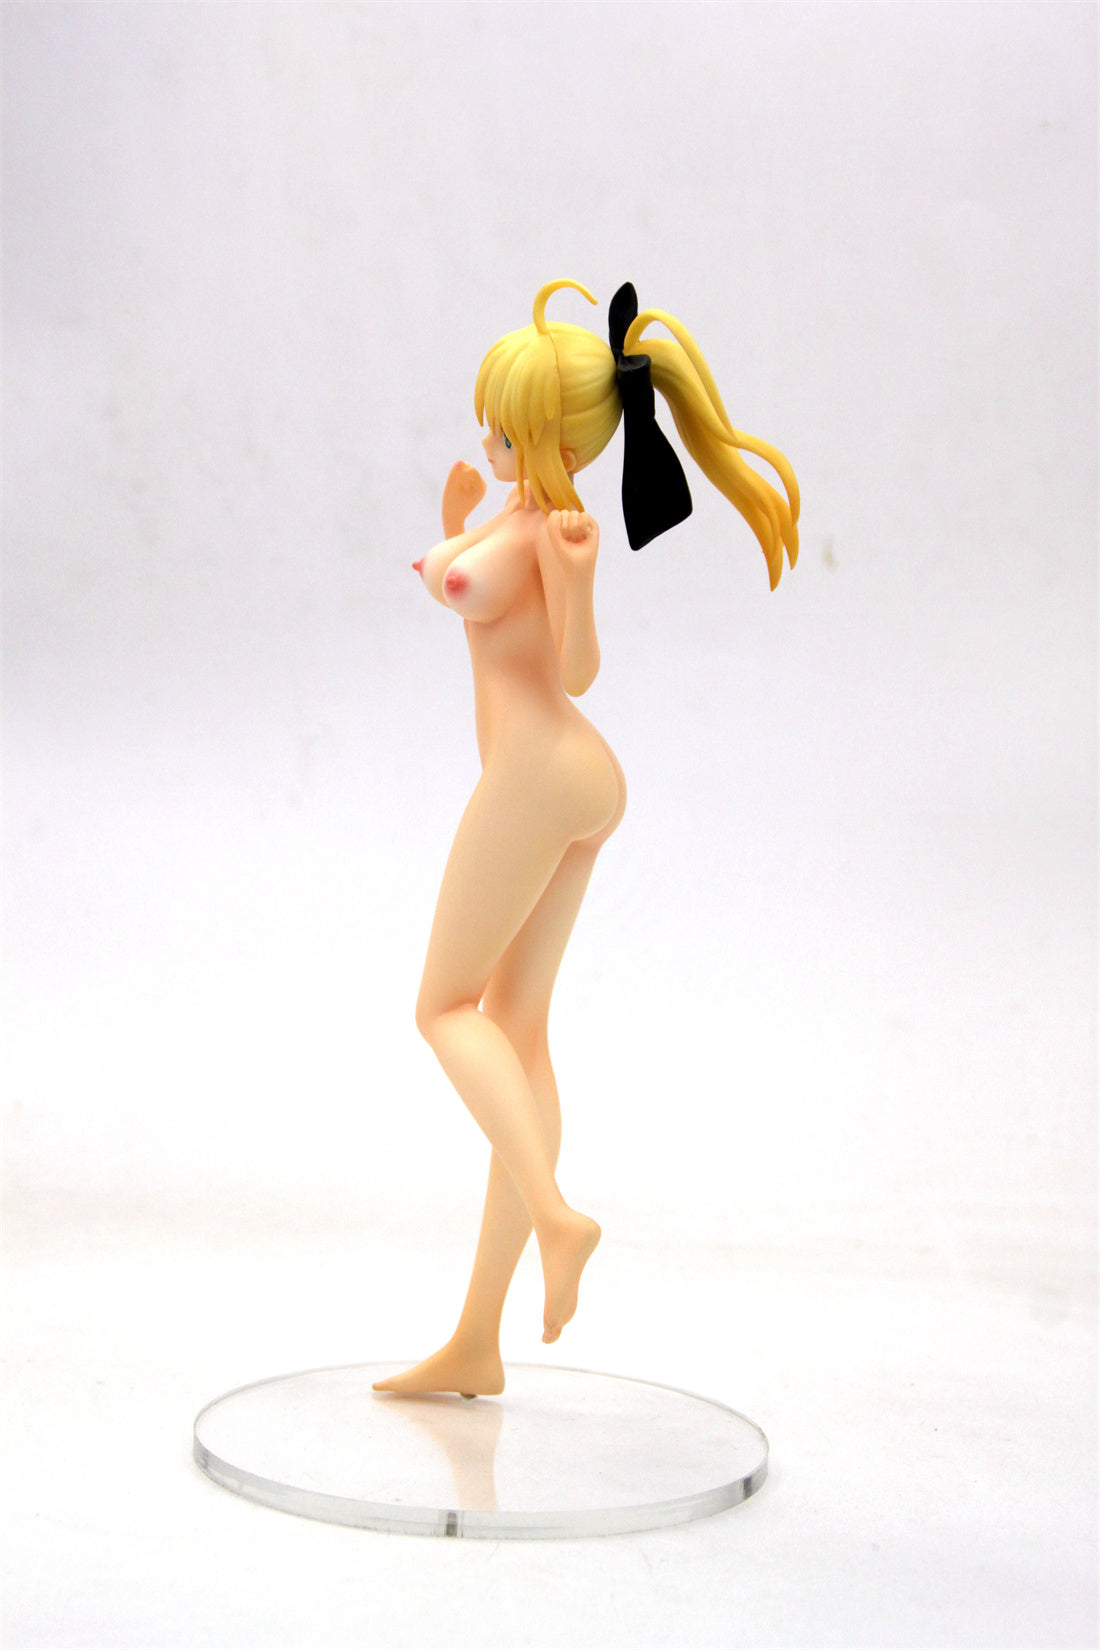 Fate/Stay Night: Saber (black bow Version) 1/6 collectible action figures naked anime figures